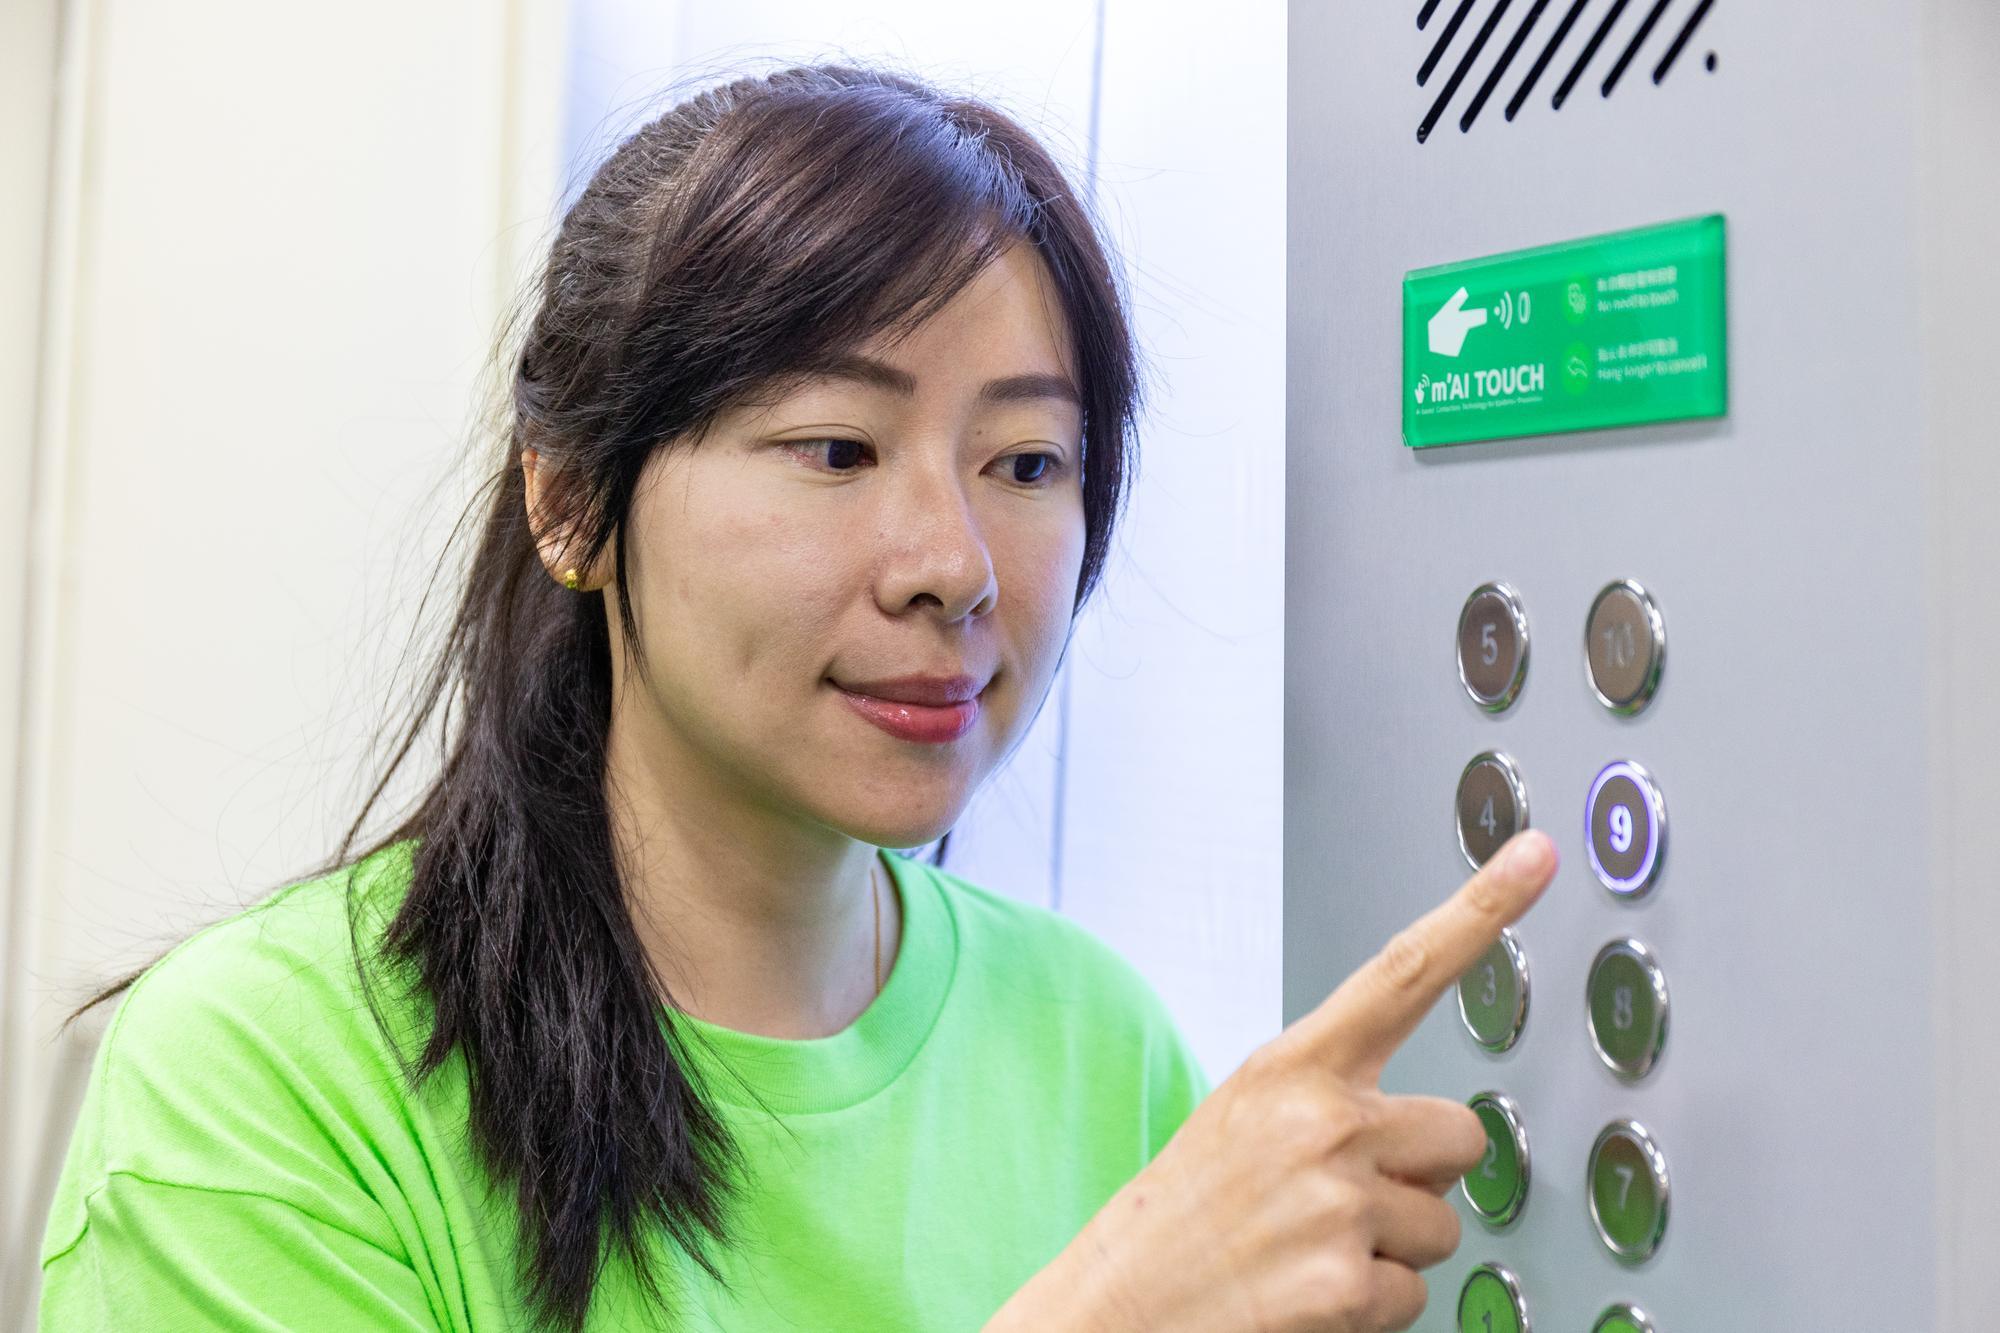 An NTHU research team has successfully developed m'AI Touch, a touch-free elevator device that helps reduce the spread of viruses.